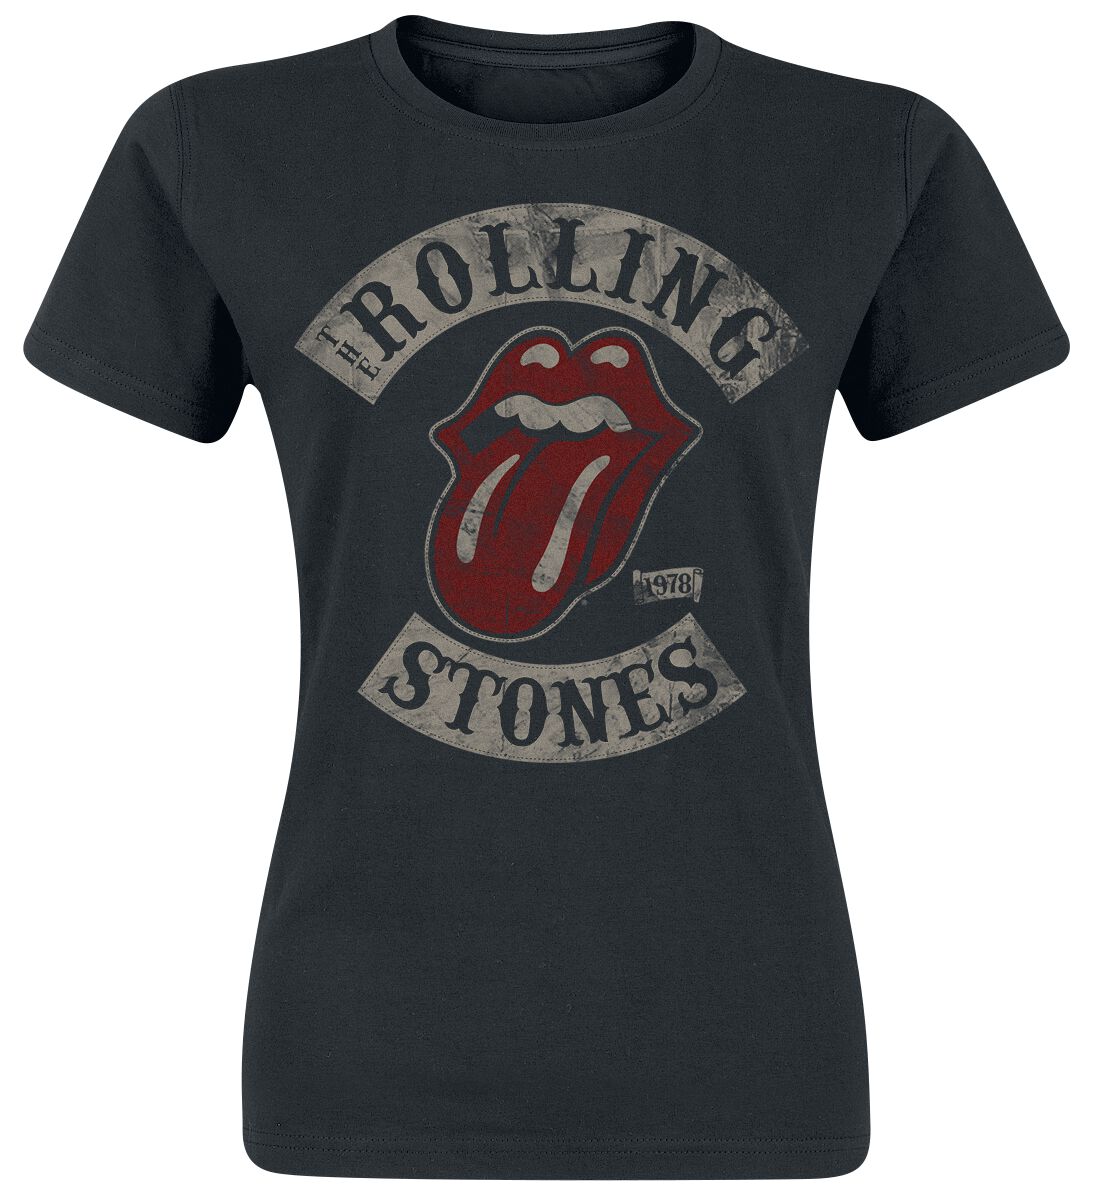 Image of T-Shirt di The Rolling Stones - 1978 - S a XXL - Donna - nero